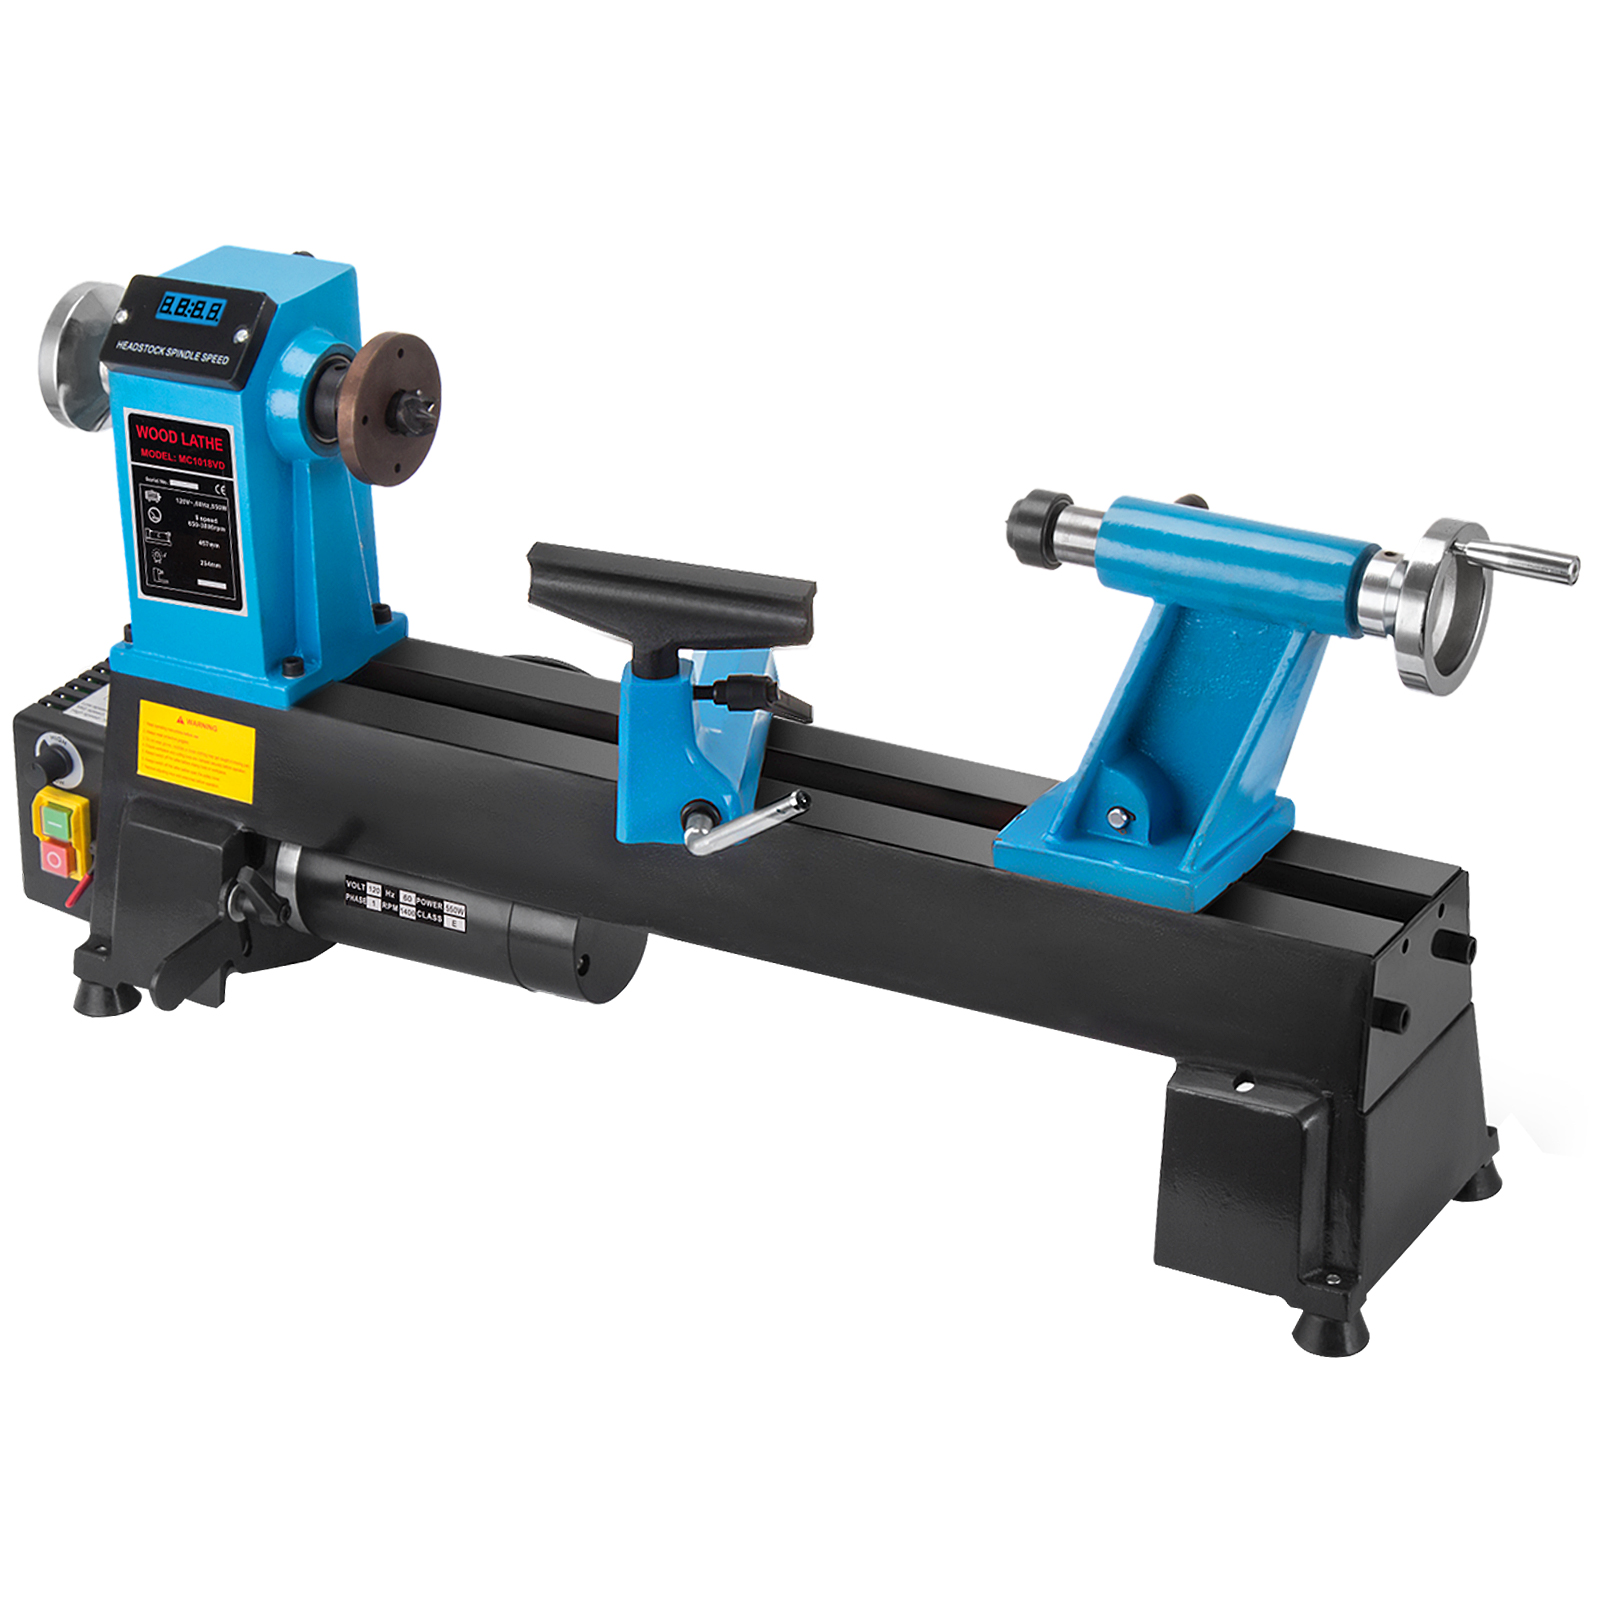 10"X18" Wood Lathe Digital Readout Benchtop Top Drive Stability 500-3800RPM от Vevor Many GEOs